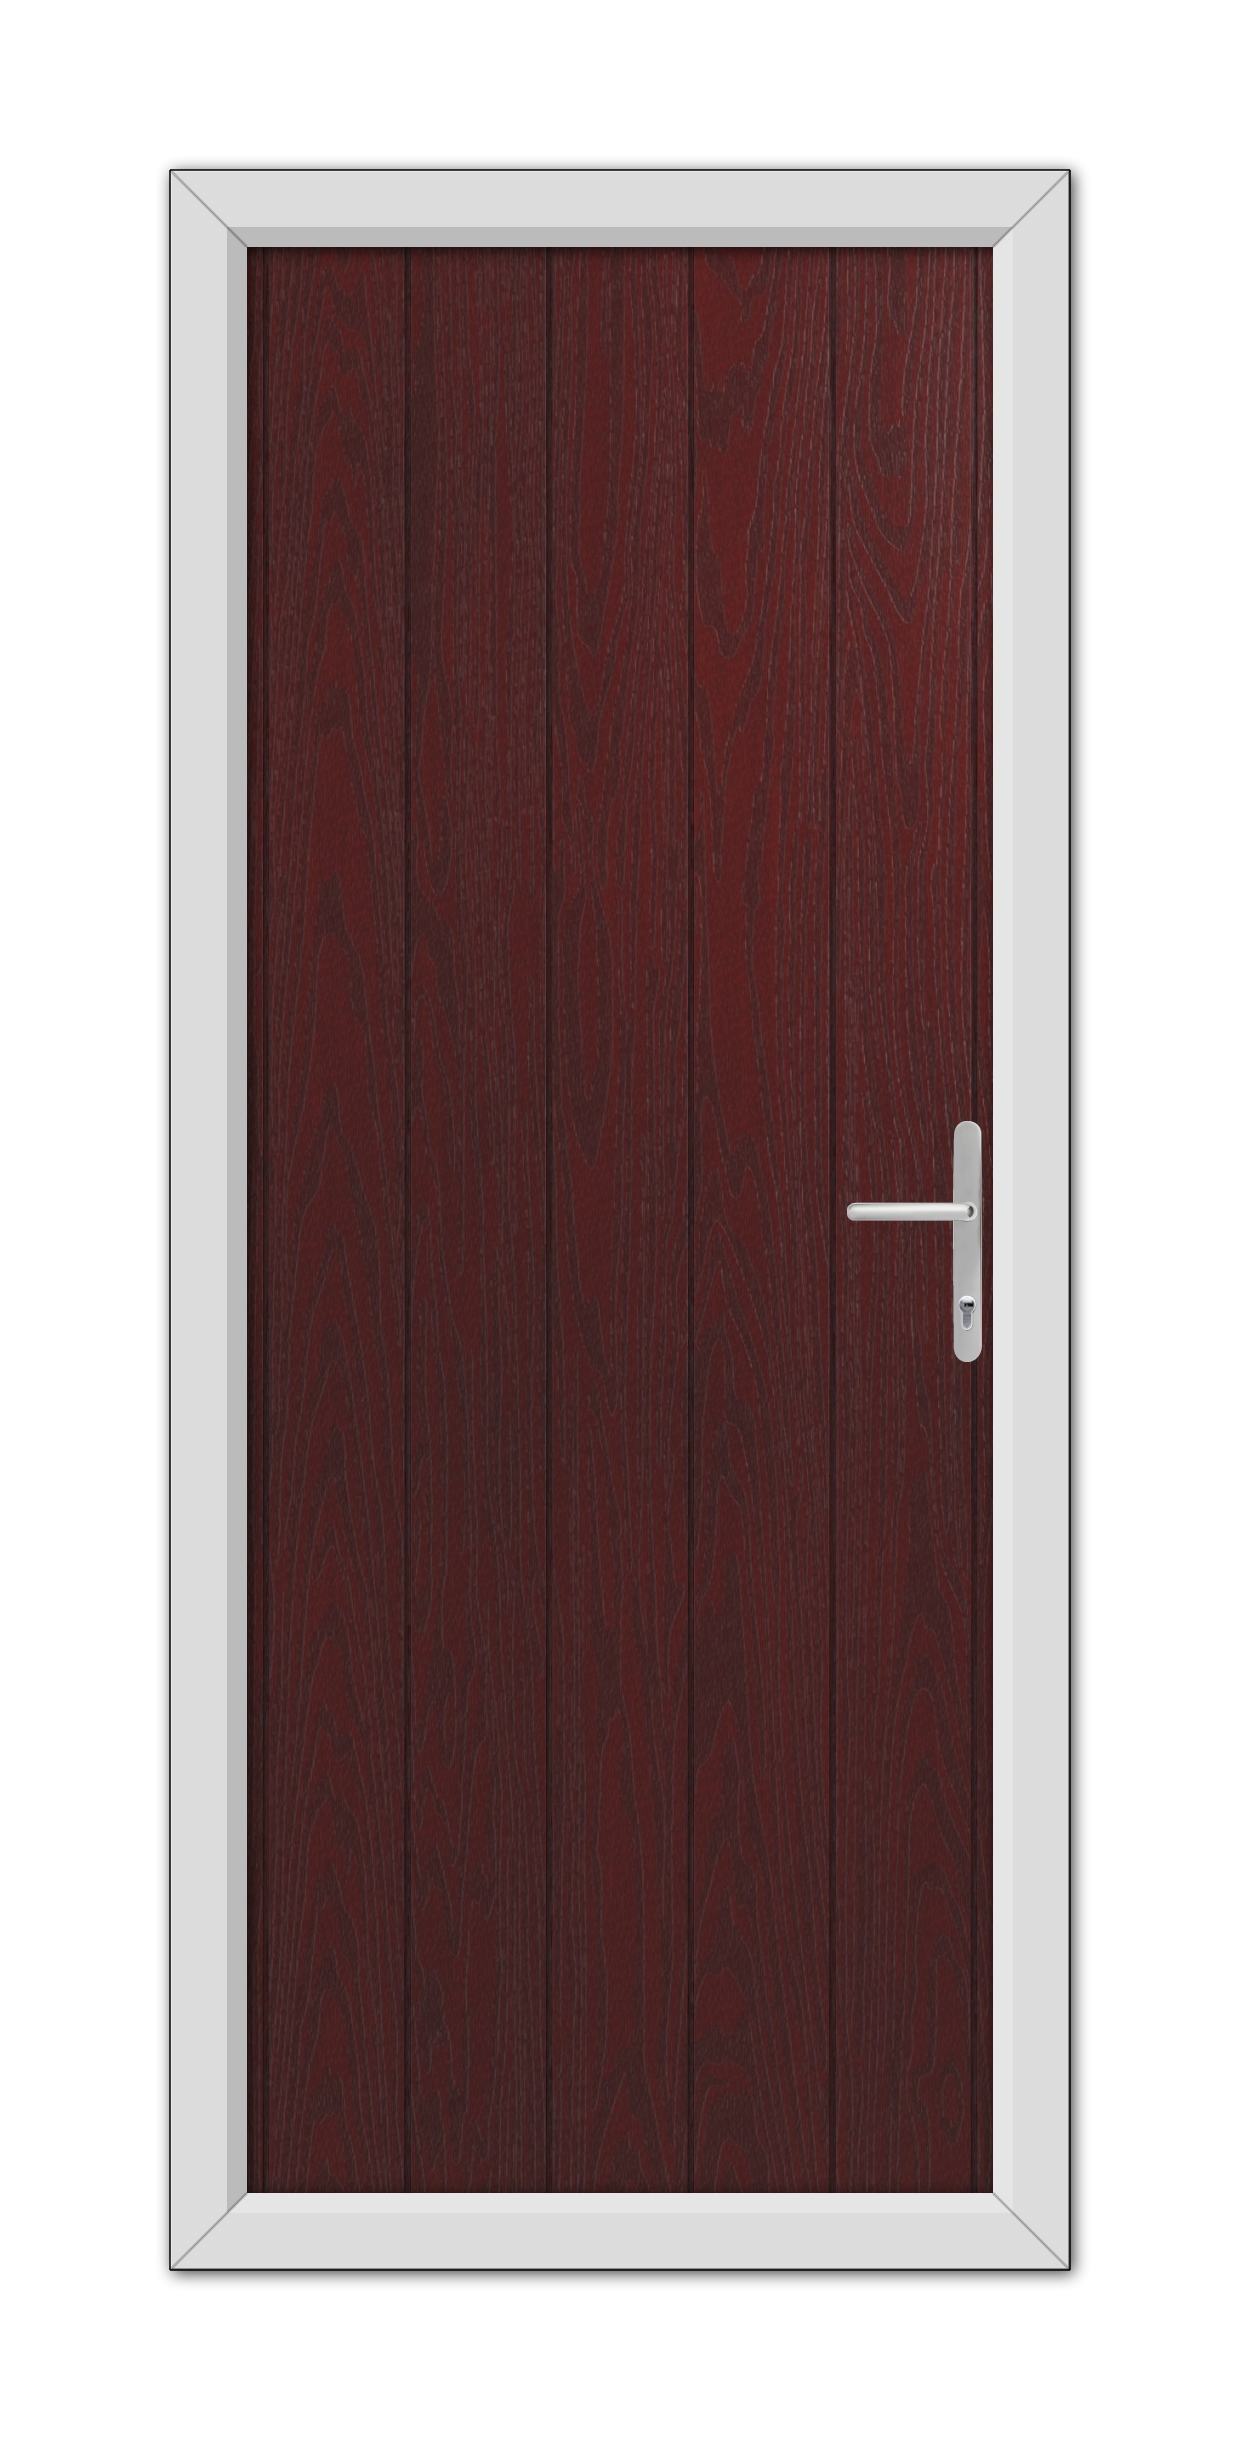 A Rosewood Gloucester Composite Door 48mm Timber Core with a white metallic handle, set within a gray door frame, viewed frontally.